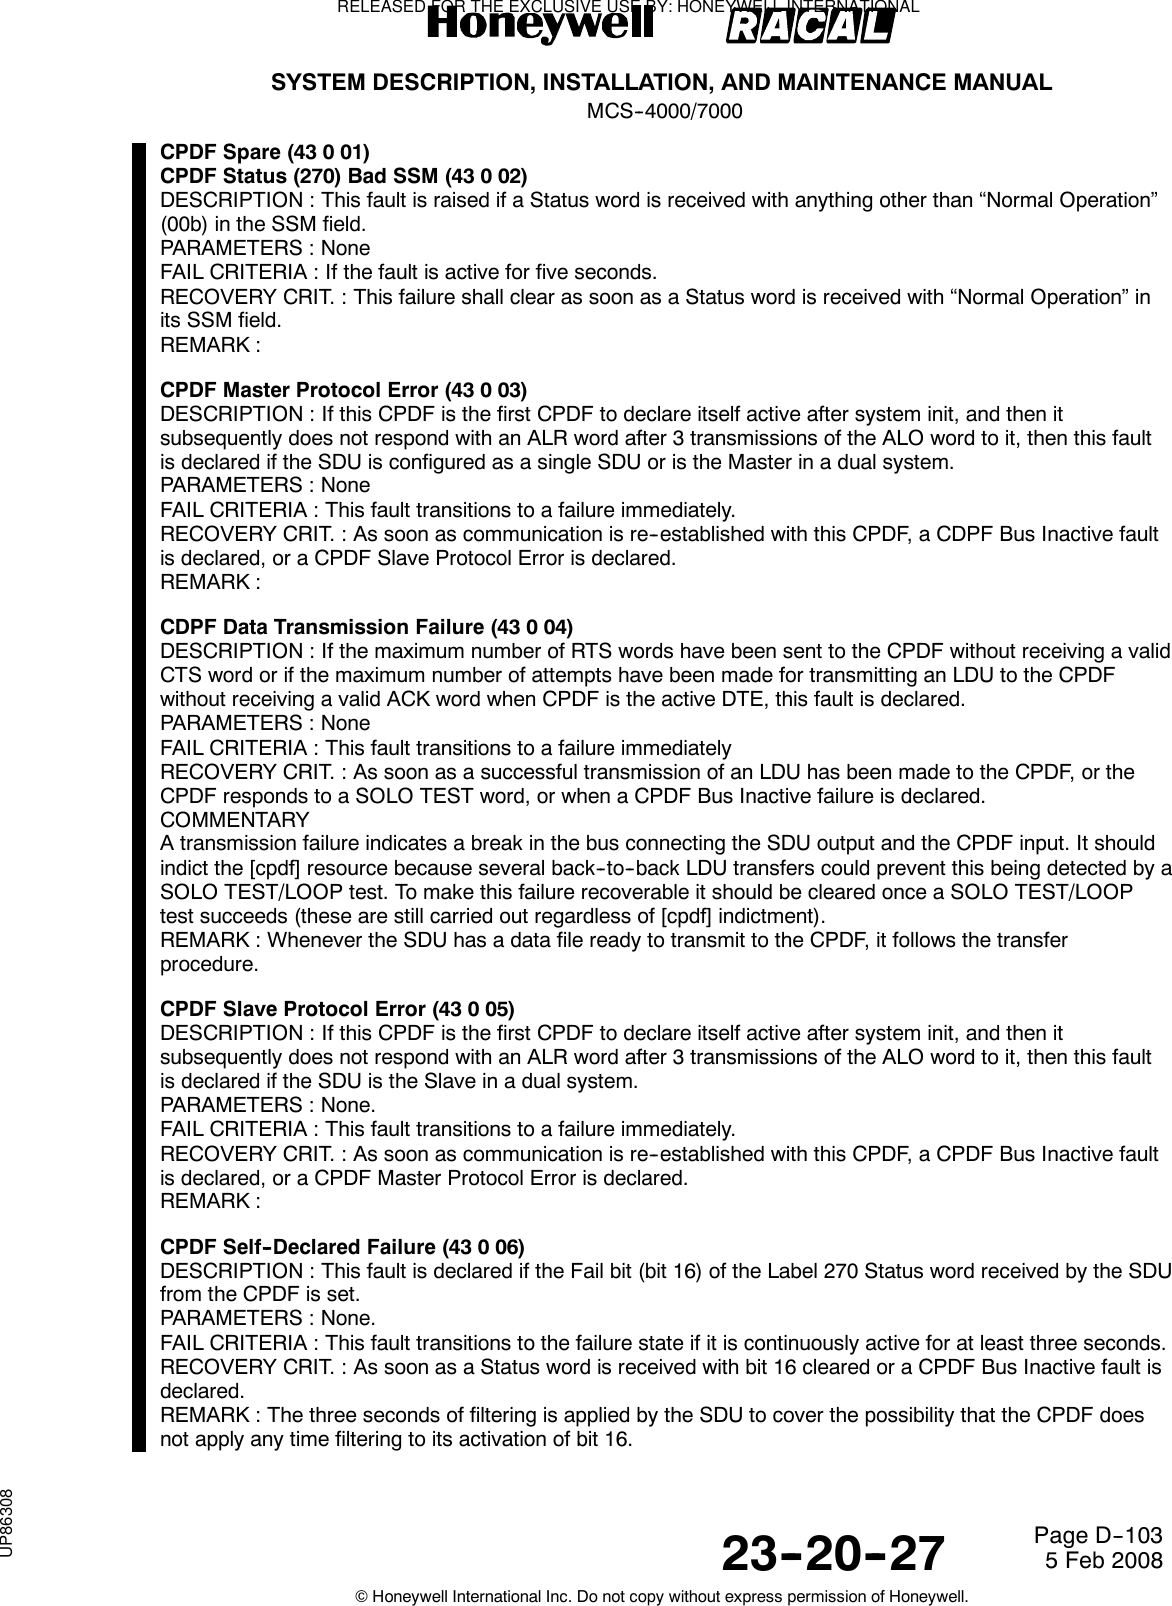 SYSTEM DESCRIPTION, INSTALLATION, AND MAINTENANCE MANUALMCS--4000/700023--20--27 5 Feb 2008©Honeywell International Inc. Do not copy without express permission of Honeywell.Page D--103CPDF Spare (43 0 01)CPDF Status (270) Bad SSM (43 0 02)DESCRIPTION : This fault is raised if a Status word is received with anything other than “Normal Operation”(00b) in the SSM field.PARAMETERS : NoneFAIL CRITERIA : If the fault is active for five seconds.RECOVERY CRIT. : This failure shall clear as soon as a Status word is received with “Normal Operation” inits SSM field.REMARK :CPDF Master Protocol Error (43 0 03)DESCRIPTION : If this CPDF is the first CPDF to declare itself active after system init, and then itsubsequently does not respond with an ALR word after 3 transmissions of the ALO word to it, then this faultis declared if the SDU is configured as a single SDU or is the Master in a dual system.PARAMETERS : NoneFAIL CRITERIA : This fault transitions to a failure immediately.RECOVERY CRIT. : As soon as communication is re--established with this CPDF, a CDPF Bus Inactive faultis declared, or a CPDF Slave Protocol Error is declared.REMARK :CDPF Data Transmission Failure (43 0 04)DESCRIPTION : If the maximum number of RTS words have been sent to the CPDF without receiving a validCTS word or if the maximum number of attempts have been made for transmitting an LDU to the CPDFwithout receiving a valid ACK word when CPDF is the active DTE, this fault is declared.PARAMETERS : NoneFAIL CRITERIA : This fault transitions to a failure immediatelyRECOVERY CRIT. : As soon as a successful transmission of an LDU has been made to the CPDF, or theCPDF responds to a SOLO TEST word, or when a CPDF Bus Inactive failure is declared.COMMENTARYA transmission failure indicates a break in the bus connecting the SDU output and the CPDF input. It shouldindict the [cpdf] resource because several back--to--back LDU transfers could prevent this being detected by aSOLO TEST/LOOP test. To make this failure recoverable it should be cleared once a SOLO TEST/LOOPtest succeeds (these are still carried out regardless of [cpdf] indictment).REMARK : Whenever the SDU has a data file ready to transmit to the CPDF, it follows the transferprocedure.CPDF Slave Protocol Error (43 0 05)DESCRIPTION : If this CPDF is the first CPDF to declare itself active after system init, and then itsubsequently does not respond with an ALR word after 3 transmissions of the ALO word to it, then this faultis declared if the SDU is the Slave in a dual system.PARAMETERS : None.FAIL CRITERIA : This fault transitions to a failure immediately.RECOVERY CRIT. : As soon as communication is re--established with this CPDF, a CPDF Bus Inactive faultis declared, or a CPDF Master Protocol Error is declared.REMARK :CPDF Self--Declared Failure (43 0 06)DESCRIPTION : This fault is declared if the Fail bit (bit 16) of the Label 270 Status word received by the SDUfrom the CPDF is set.PARAMETERS : None.FAIL CRITERIA : This fault transitions to the failure state if it is continuously active for at least three seconds.RECOVERY CRIT. : As soon as a Status word is received with bit 16 cleared or a CPDF Bus Inactive fault isdeclared.REMARK : The three seconds of filtering is applied by the SDU to cover the possibility that the CPDF doesnot apply any time filtering to its activation of bit 16.RELEASED FOR THE EXCLUSIVE USE BY: HONEYWELL INTERNATIONALUP86308